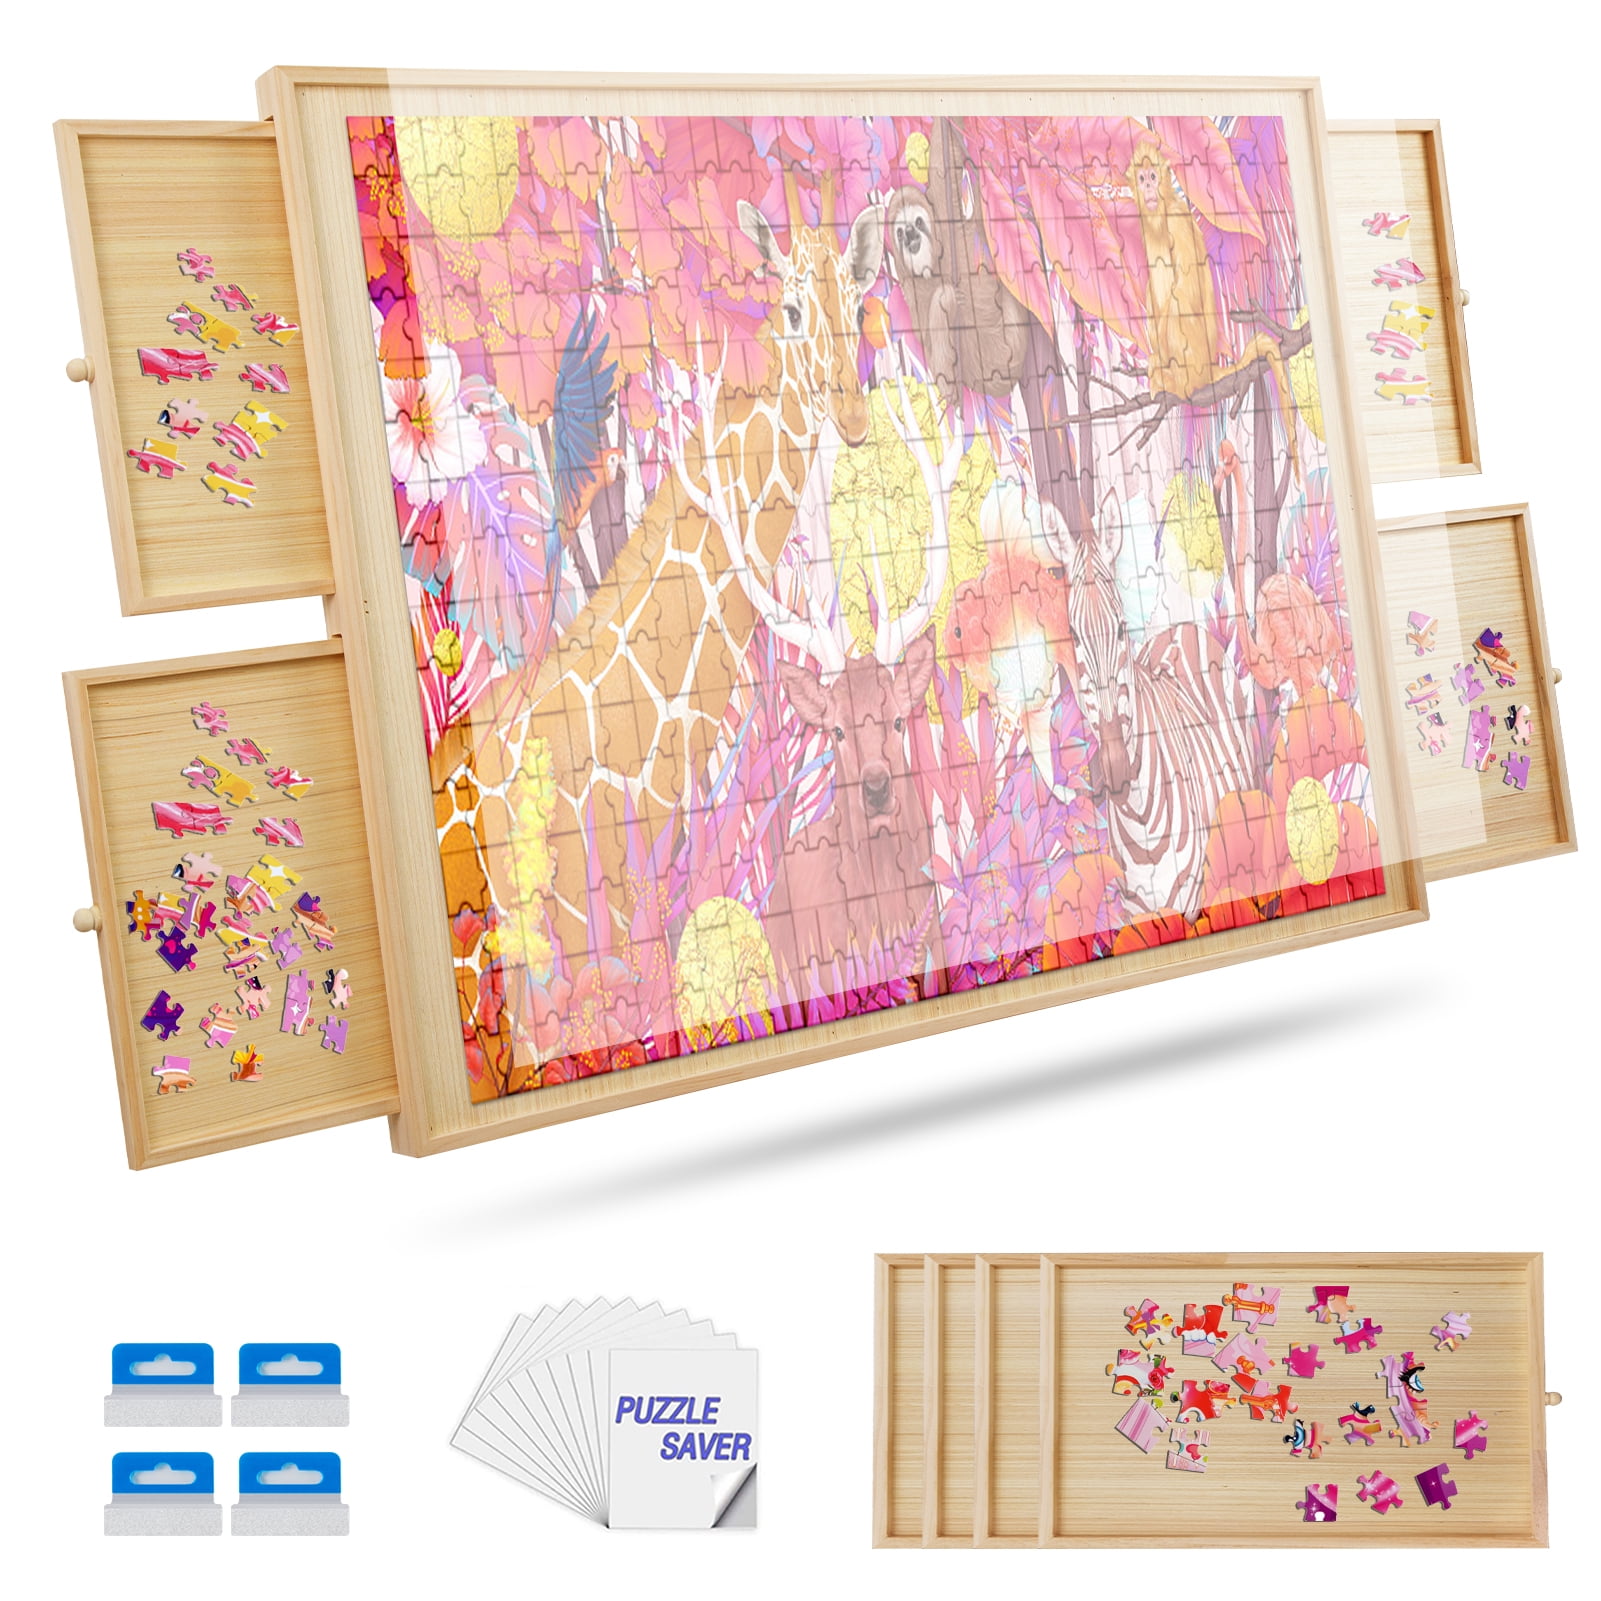  Puzzle Board with Drawers & Cover Mat - 1000 Pieces Wooden  Jigsaw Puzzle Table - 24”x30” Portable Puzzle Board with Cover for Adults &  Children - Colorful Puzzle Trays for Sorting 